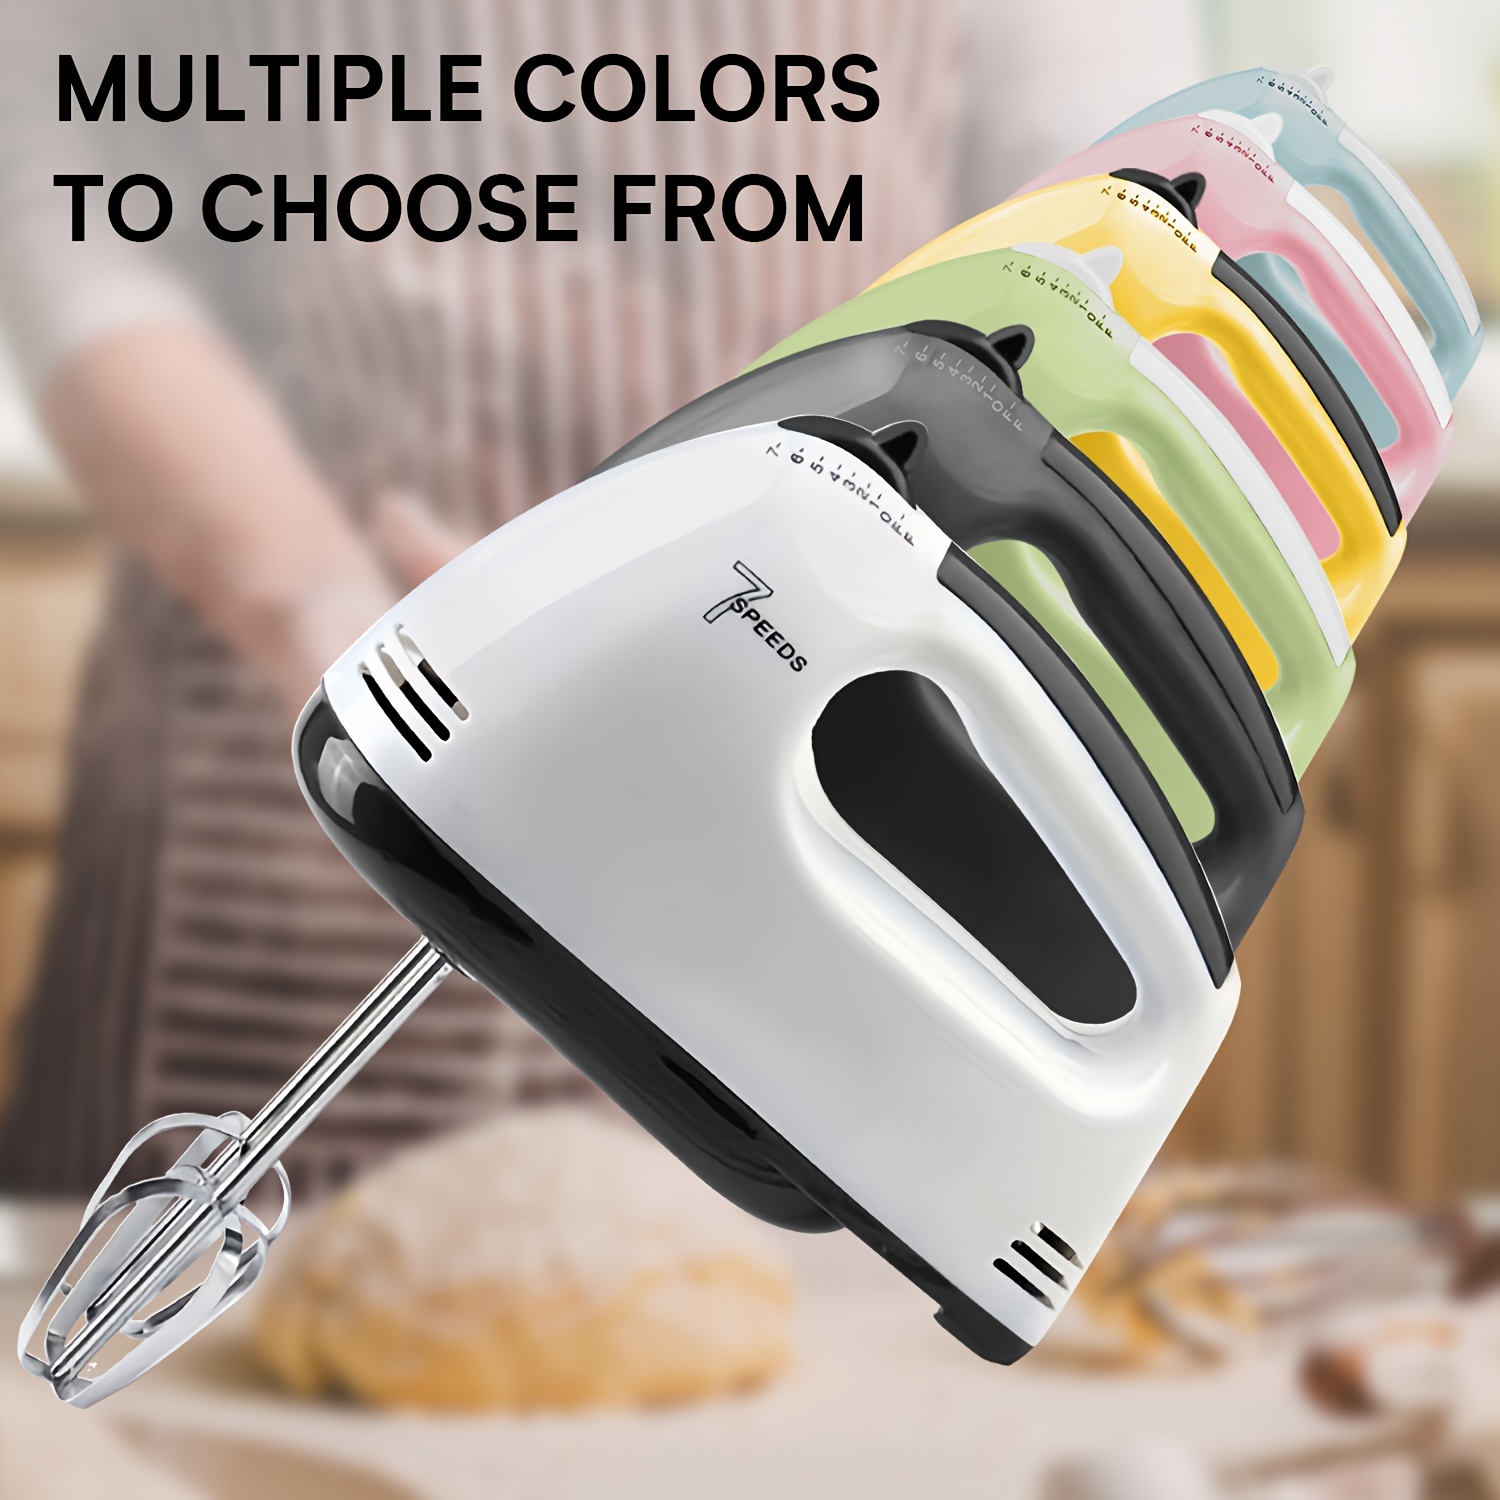 

1pc, Electric Hand Mixer, Hand-held Egg Beater, Kitchen Appliances, Metal And Plastic, Multiple Colors, Stirrer, Food Mixing Tool